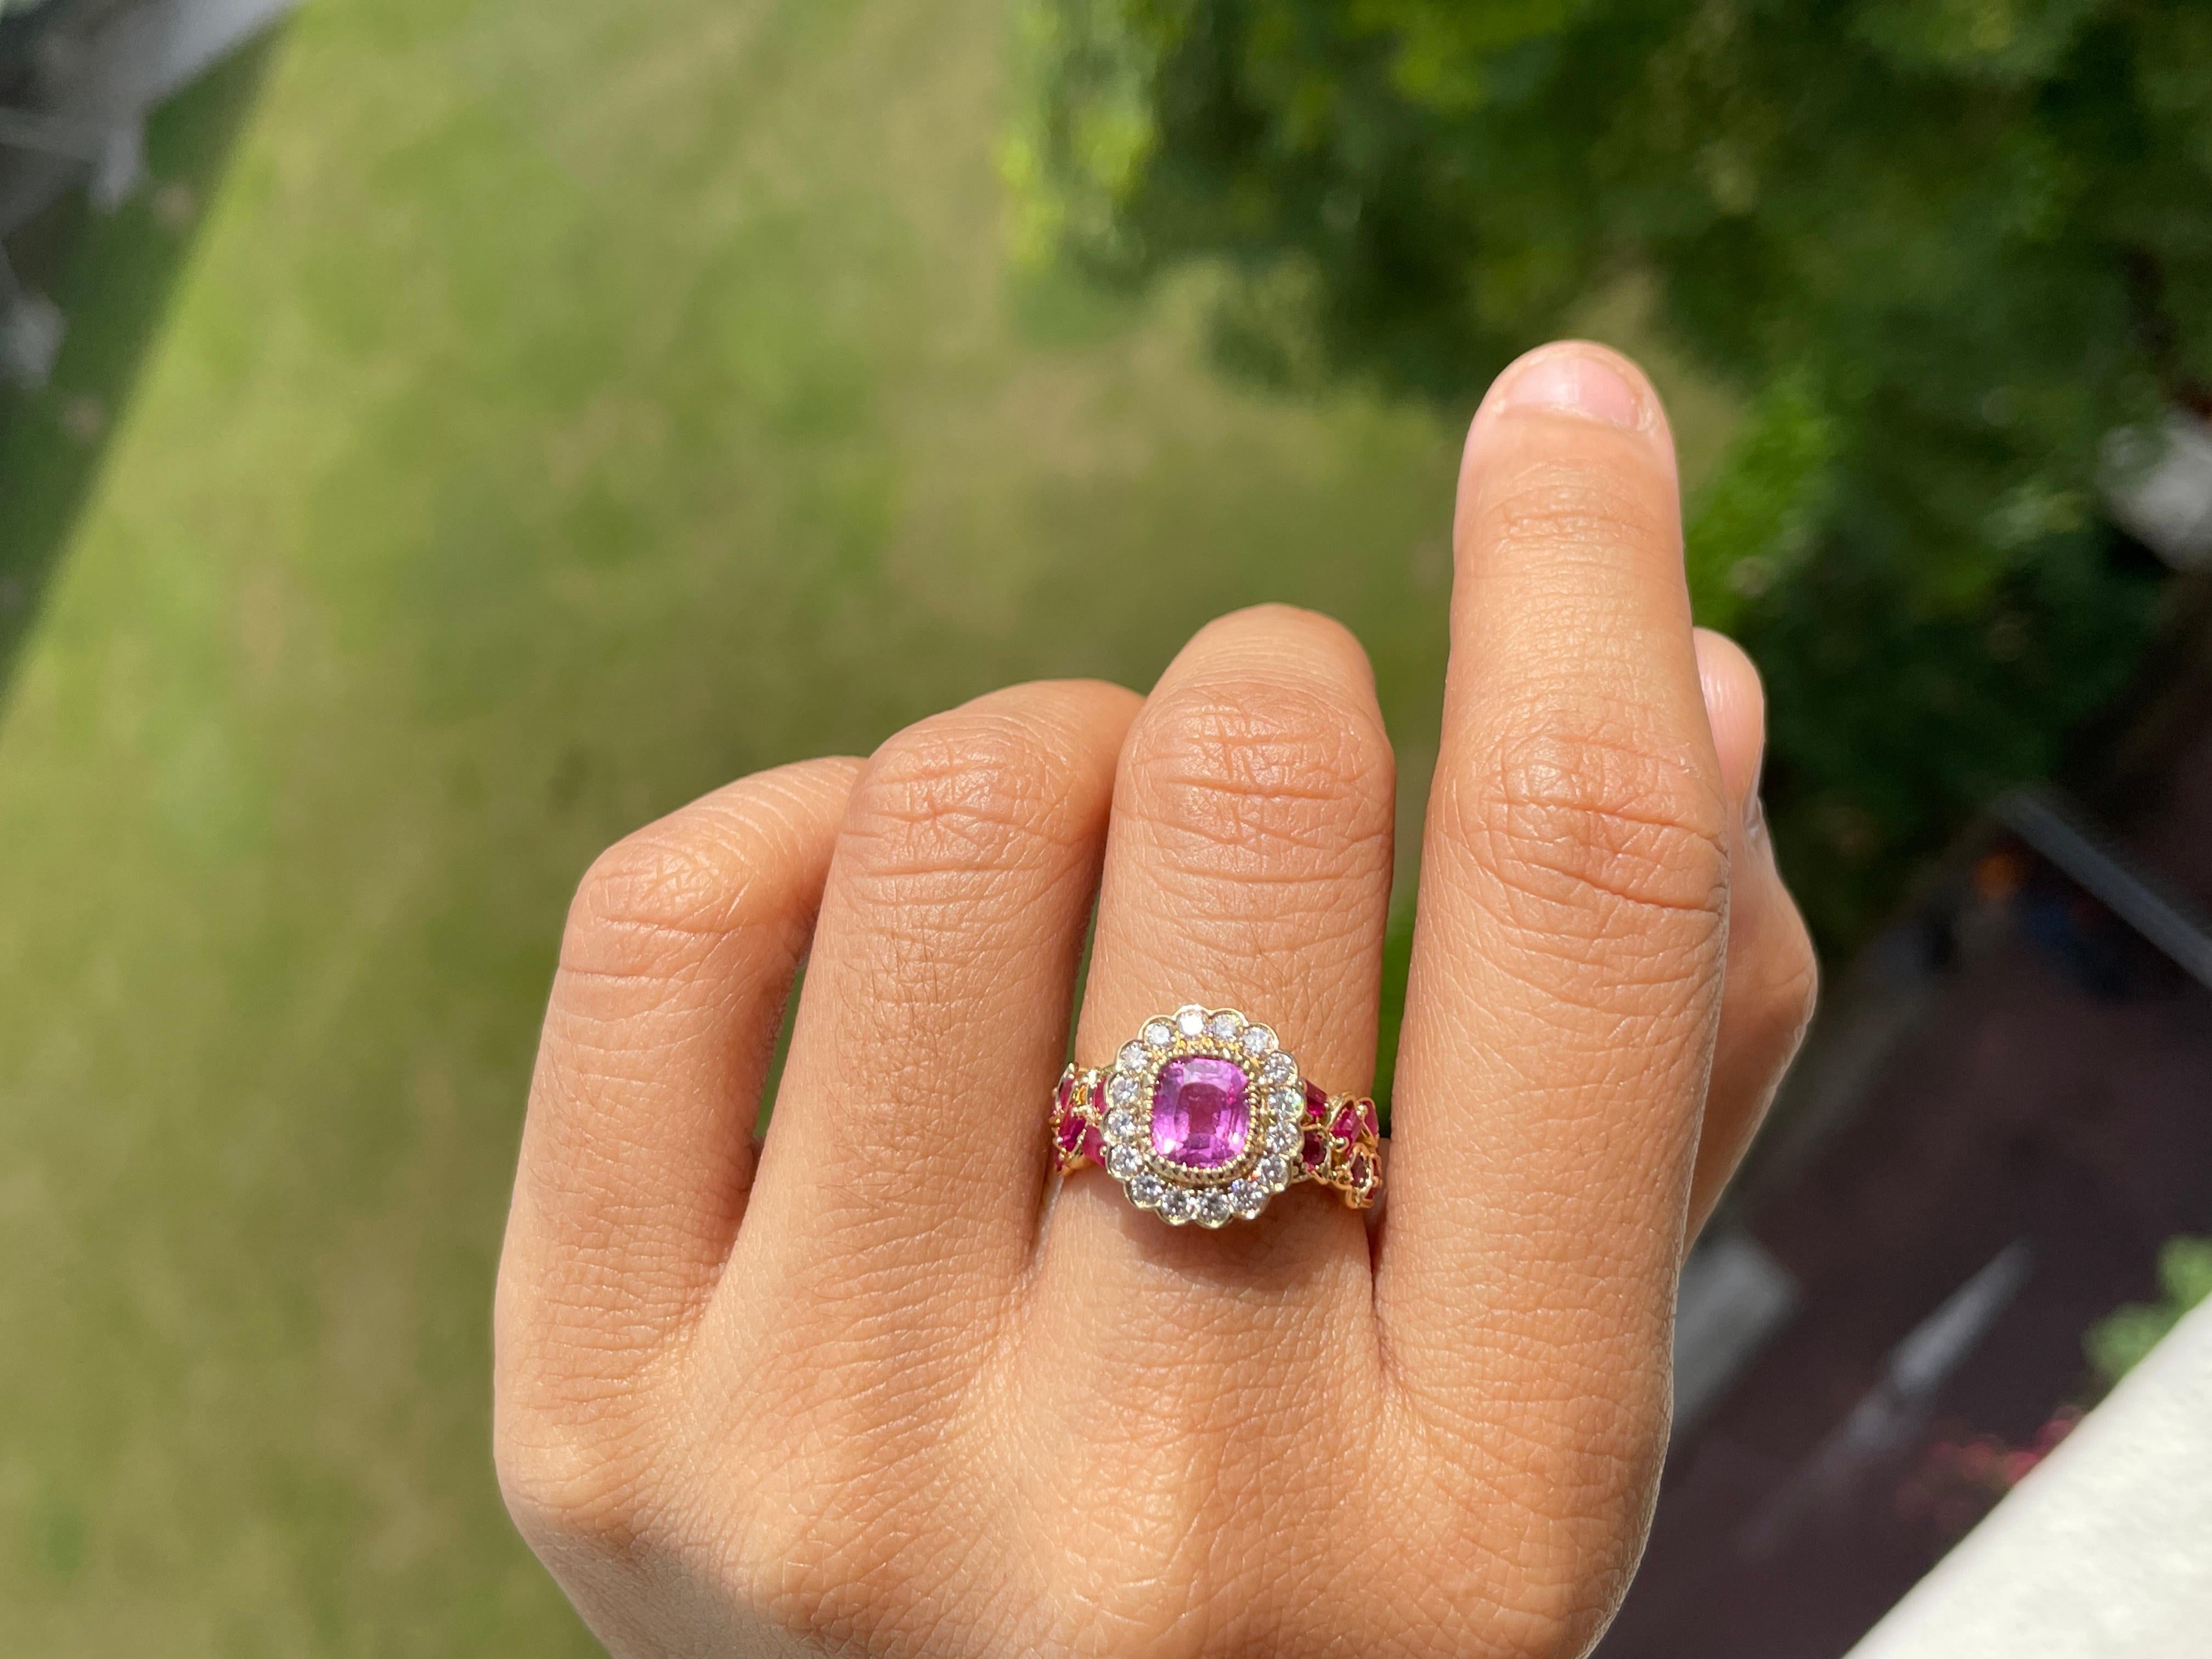 This ring features a 1.62-carat no-heat Burma pink sapphire and ruby. Its vintage-inspired design, adorned with clustered Burma rubies along the shank and encircled by dazzling diamonds, exudes timeless elegance and unparalleled sophistication.